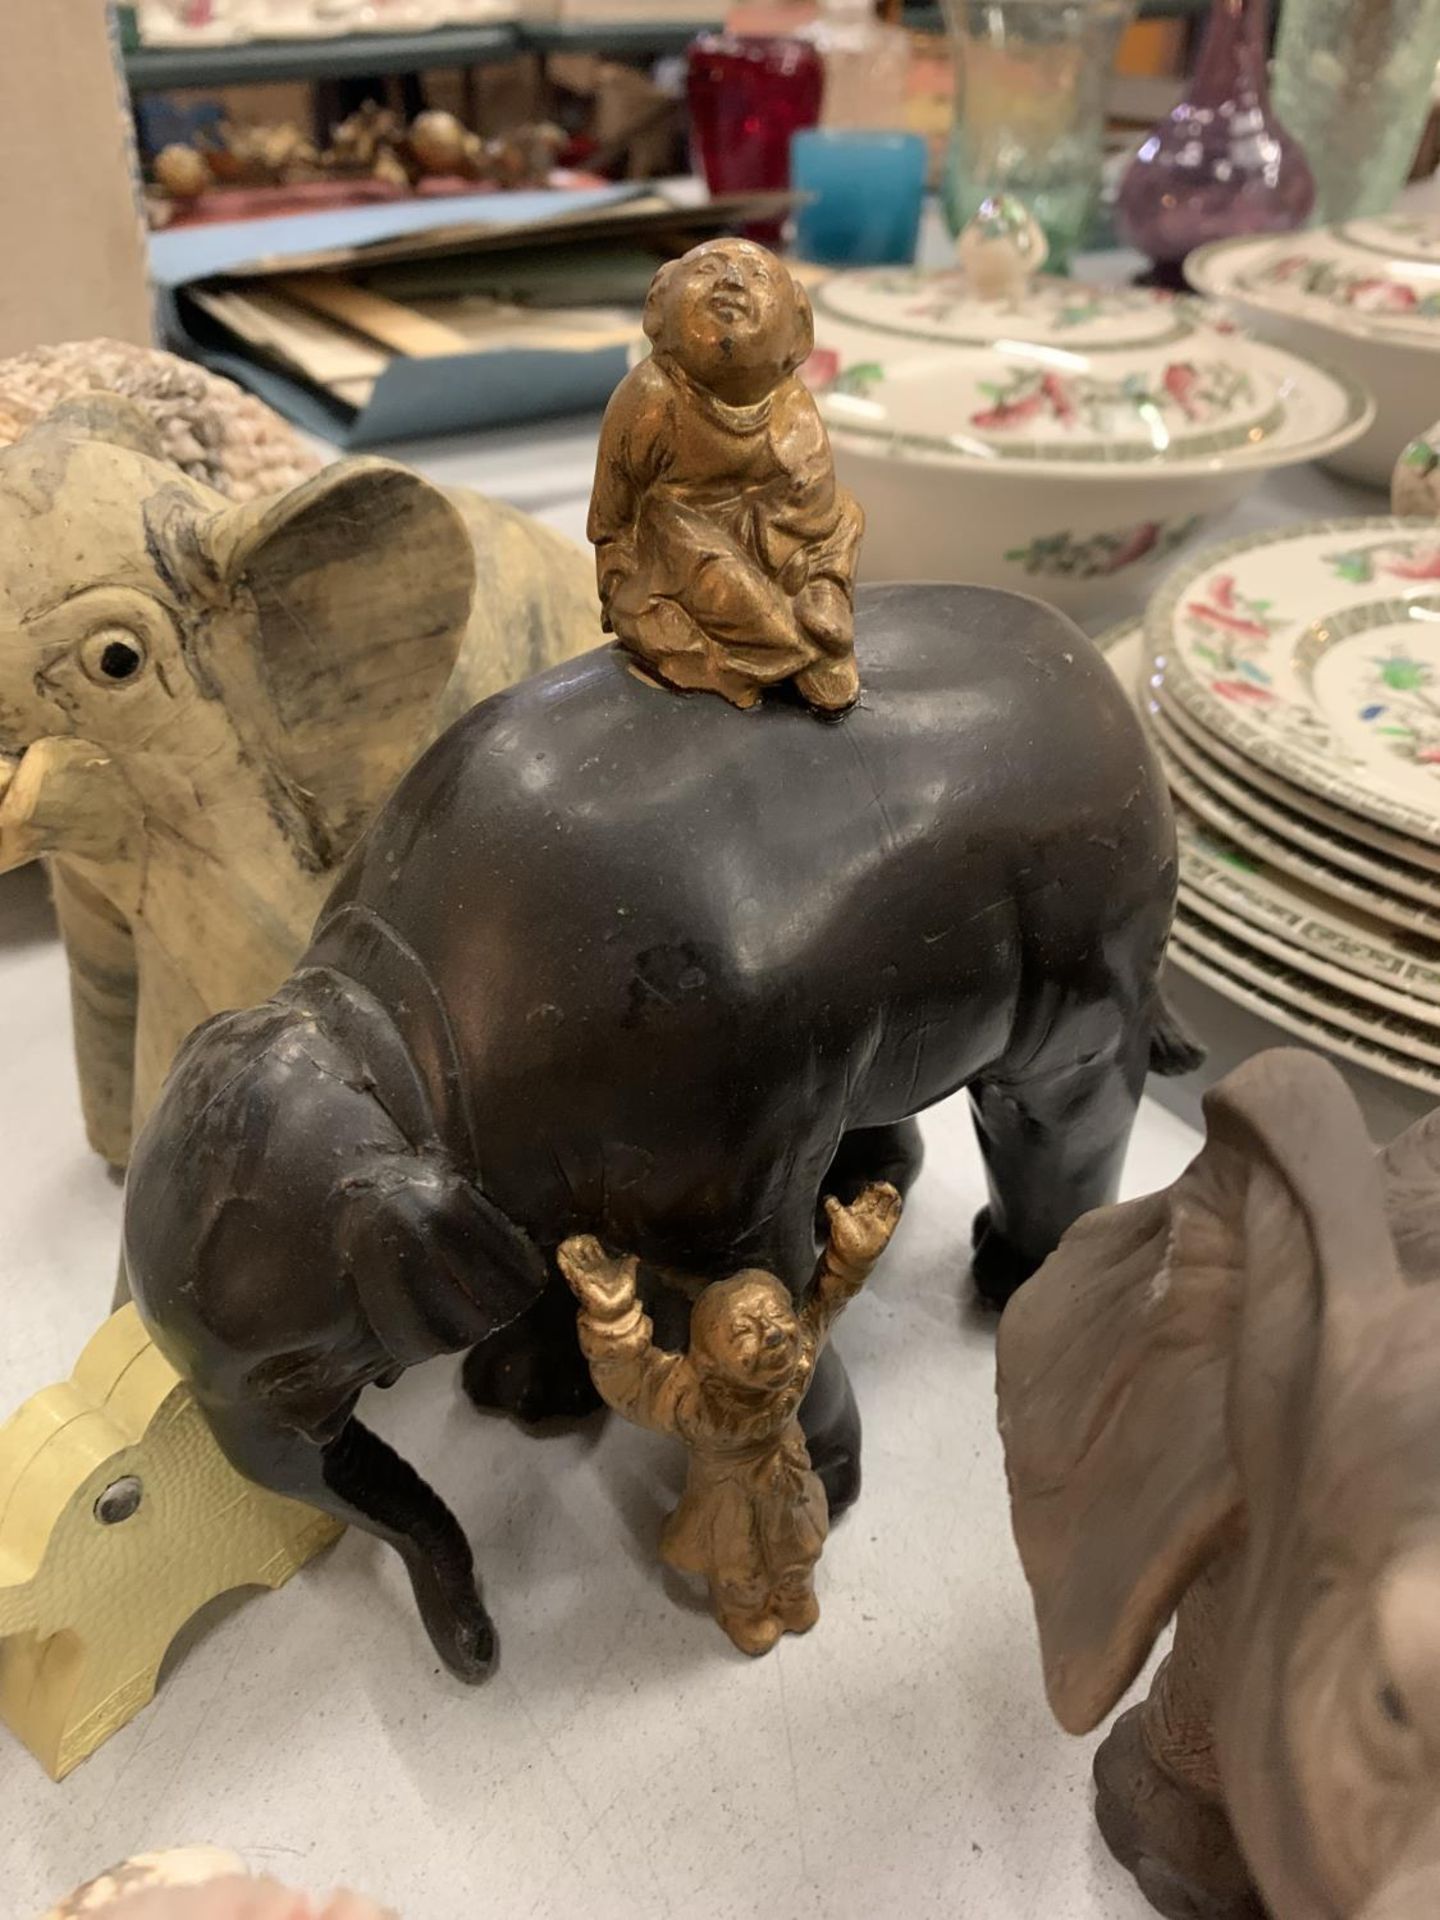 A LARGE QUANTITY OF COLLECTABLE ELEPHANTS OF ALL SIZES, INCLUDES, CERAMIC, WOODEN, ETC - Image 7 of 8